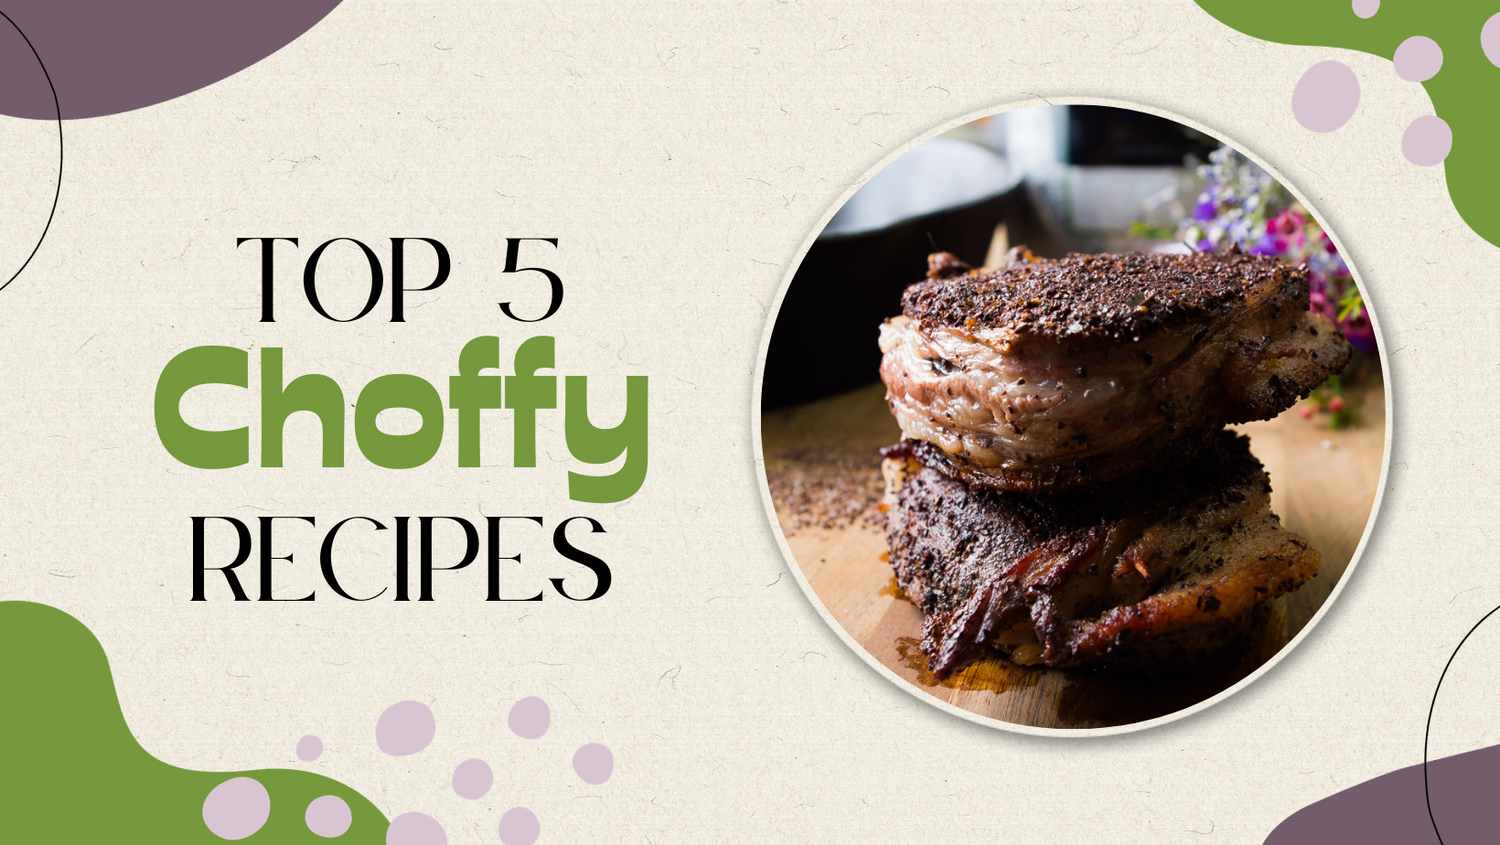 Top 5 Brewed Cacao Recipes with Choffy!